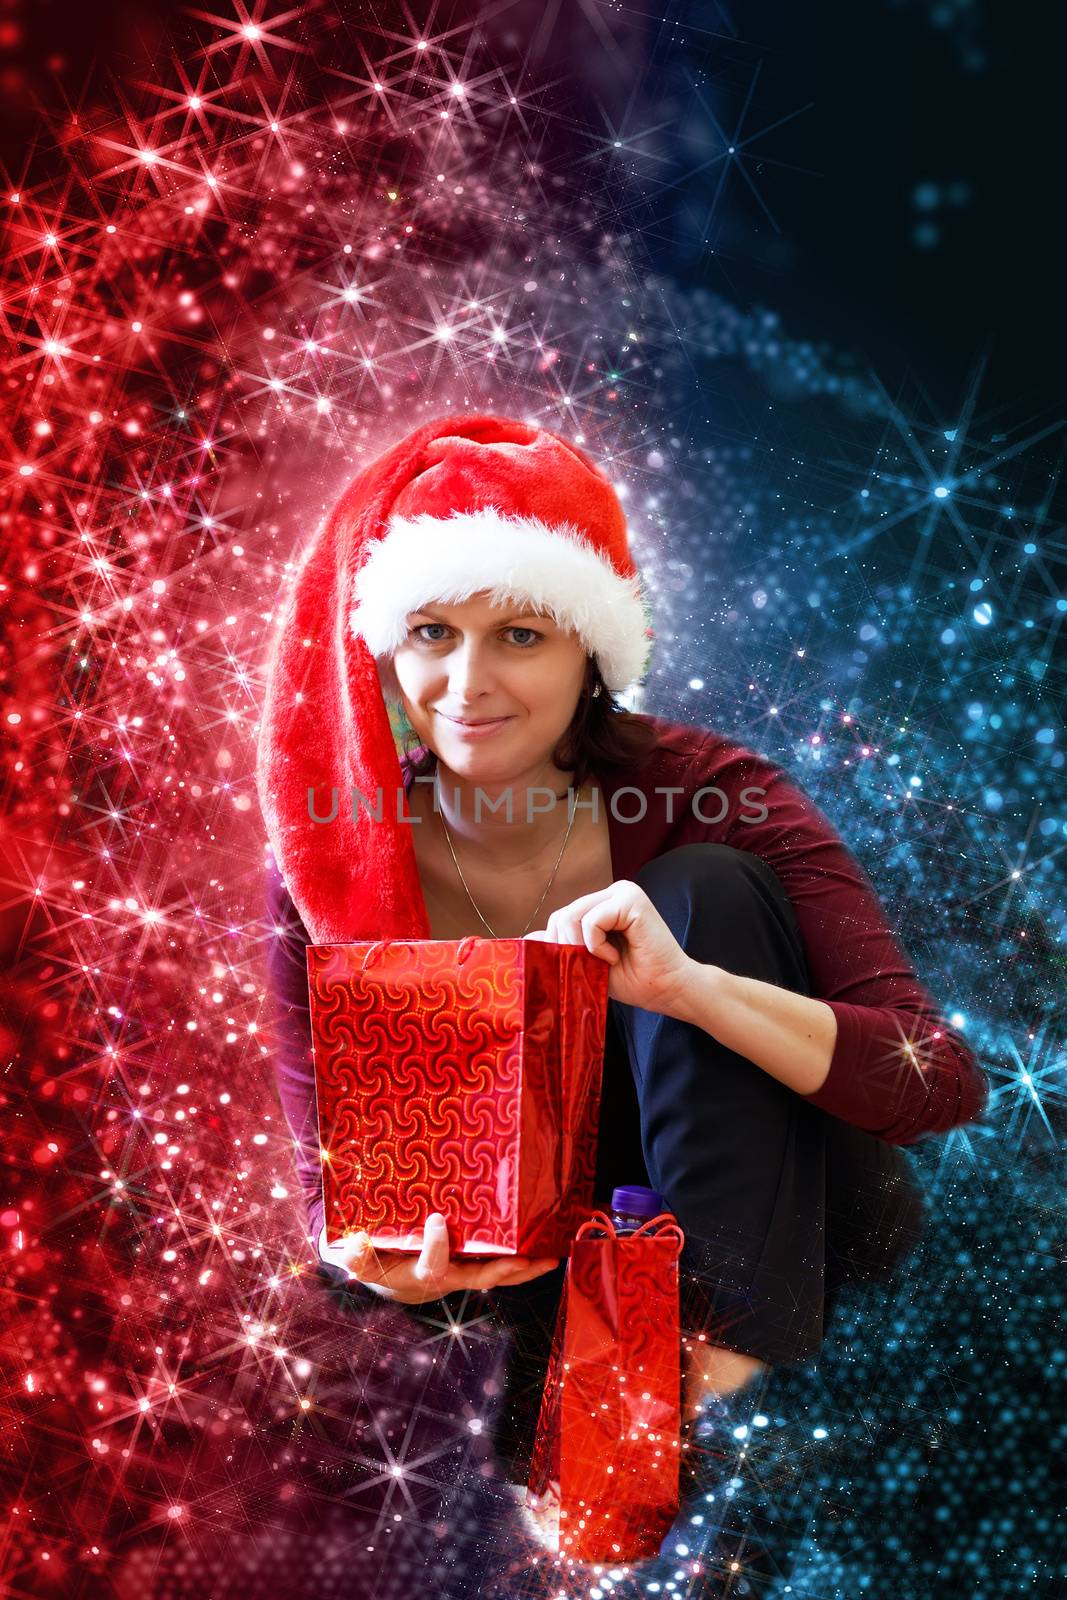 Beautiful middle age woman in red party santa hat sitting with gifts, with abstract background